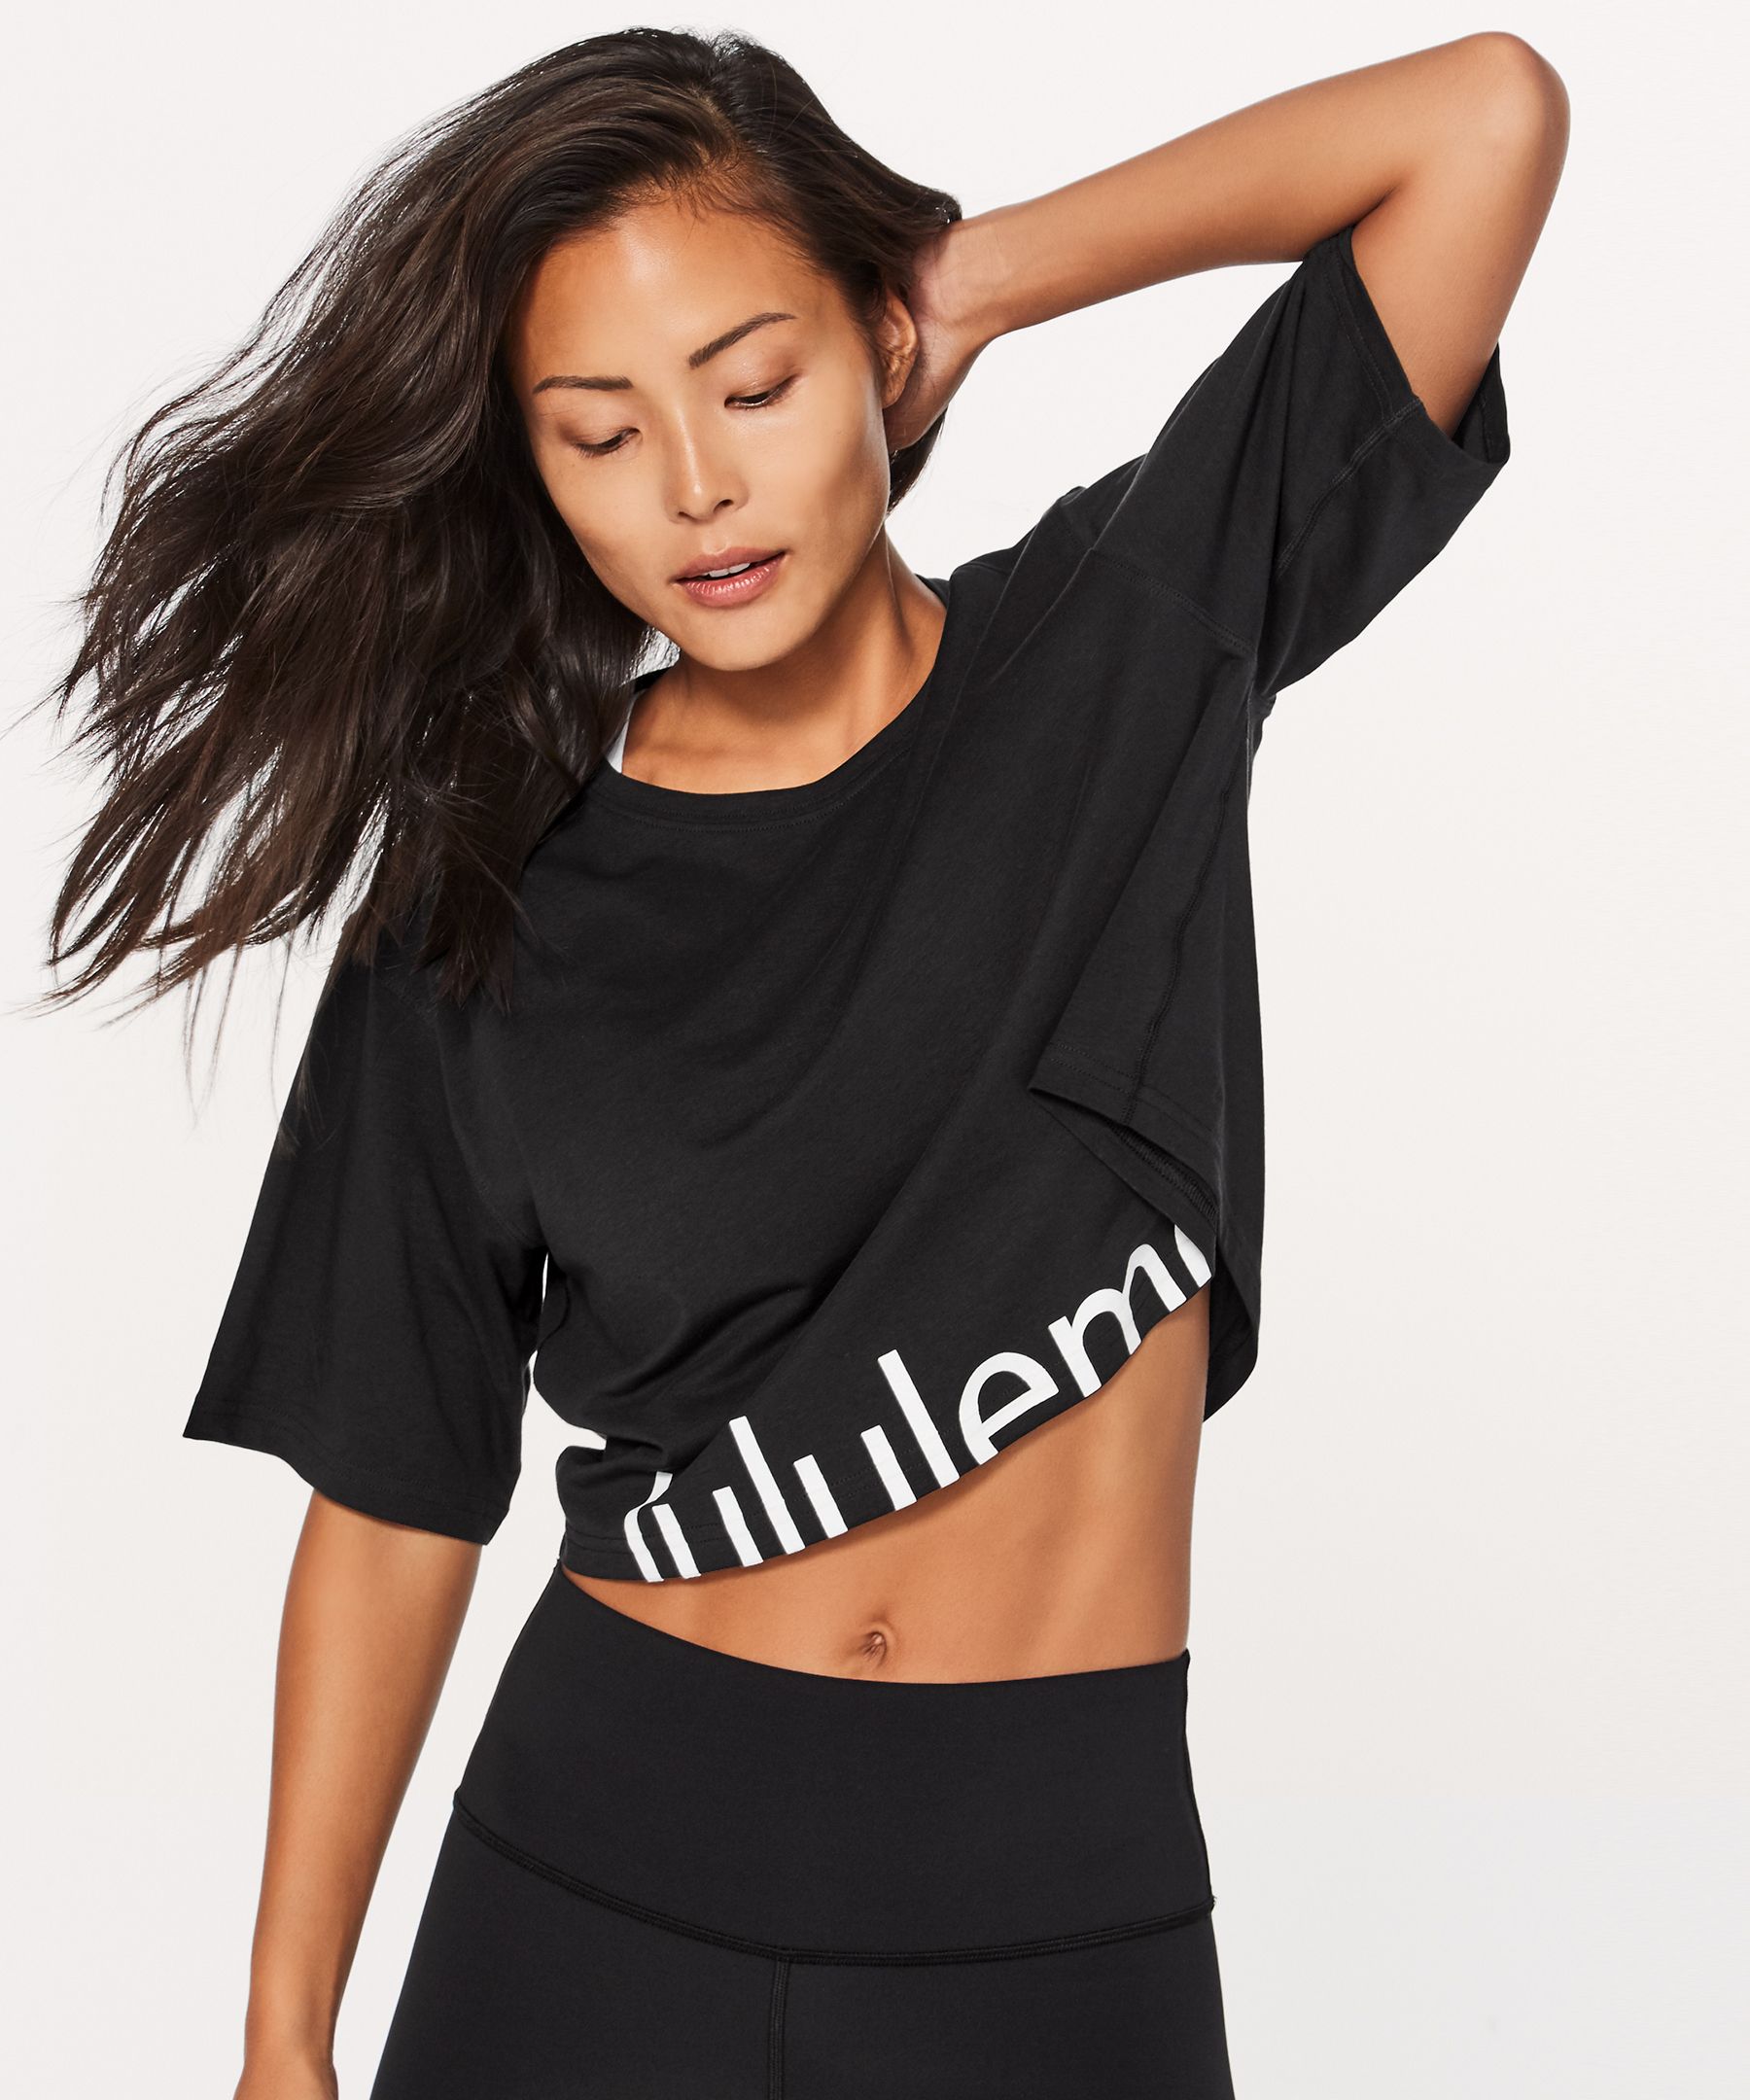 Lululemon Crop Tee Dupe  International Society of Precision Agriculture